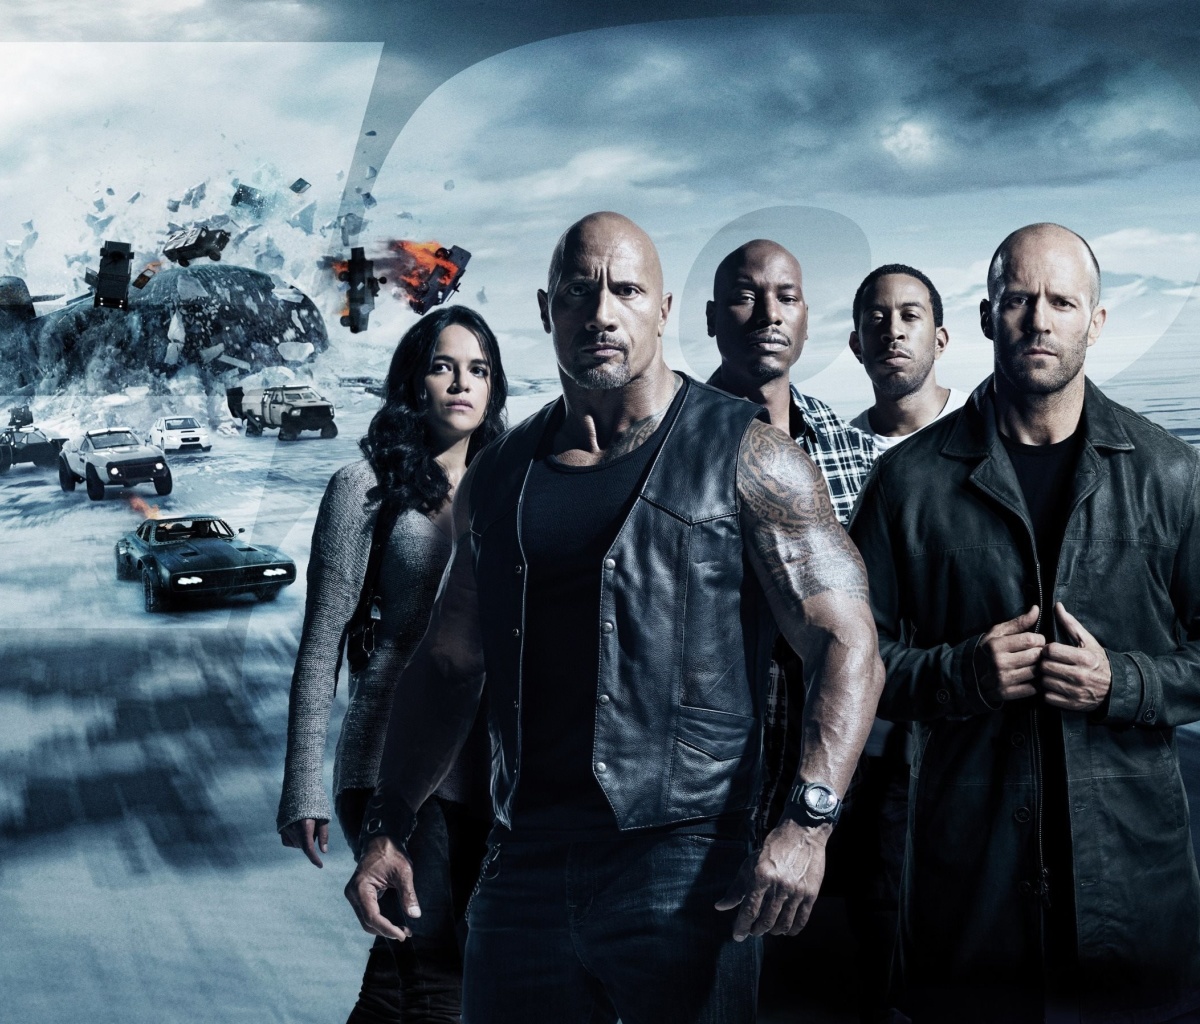 Das The Fate of the Furious with Vin Diesel, Dwayne Johnson, Charlize Theron Wallpaper 1200x1024